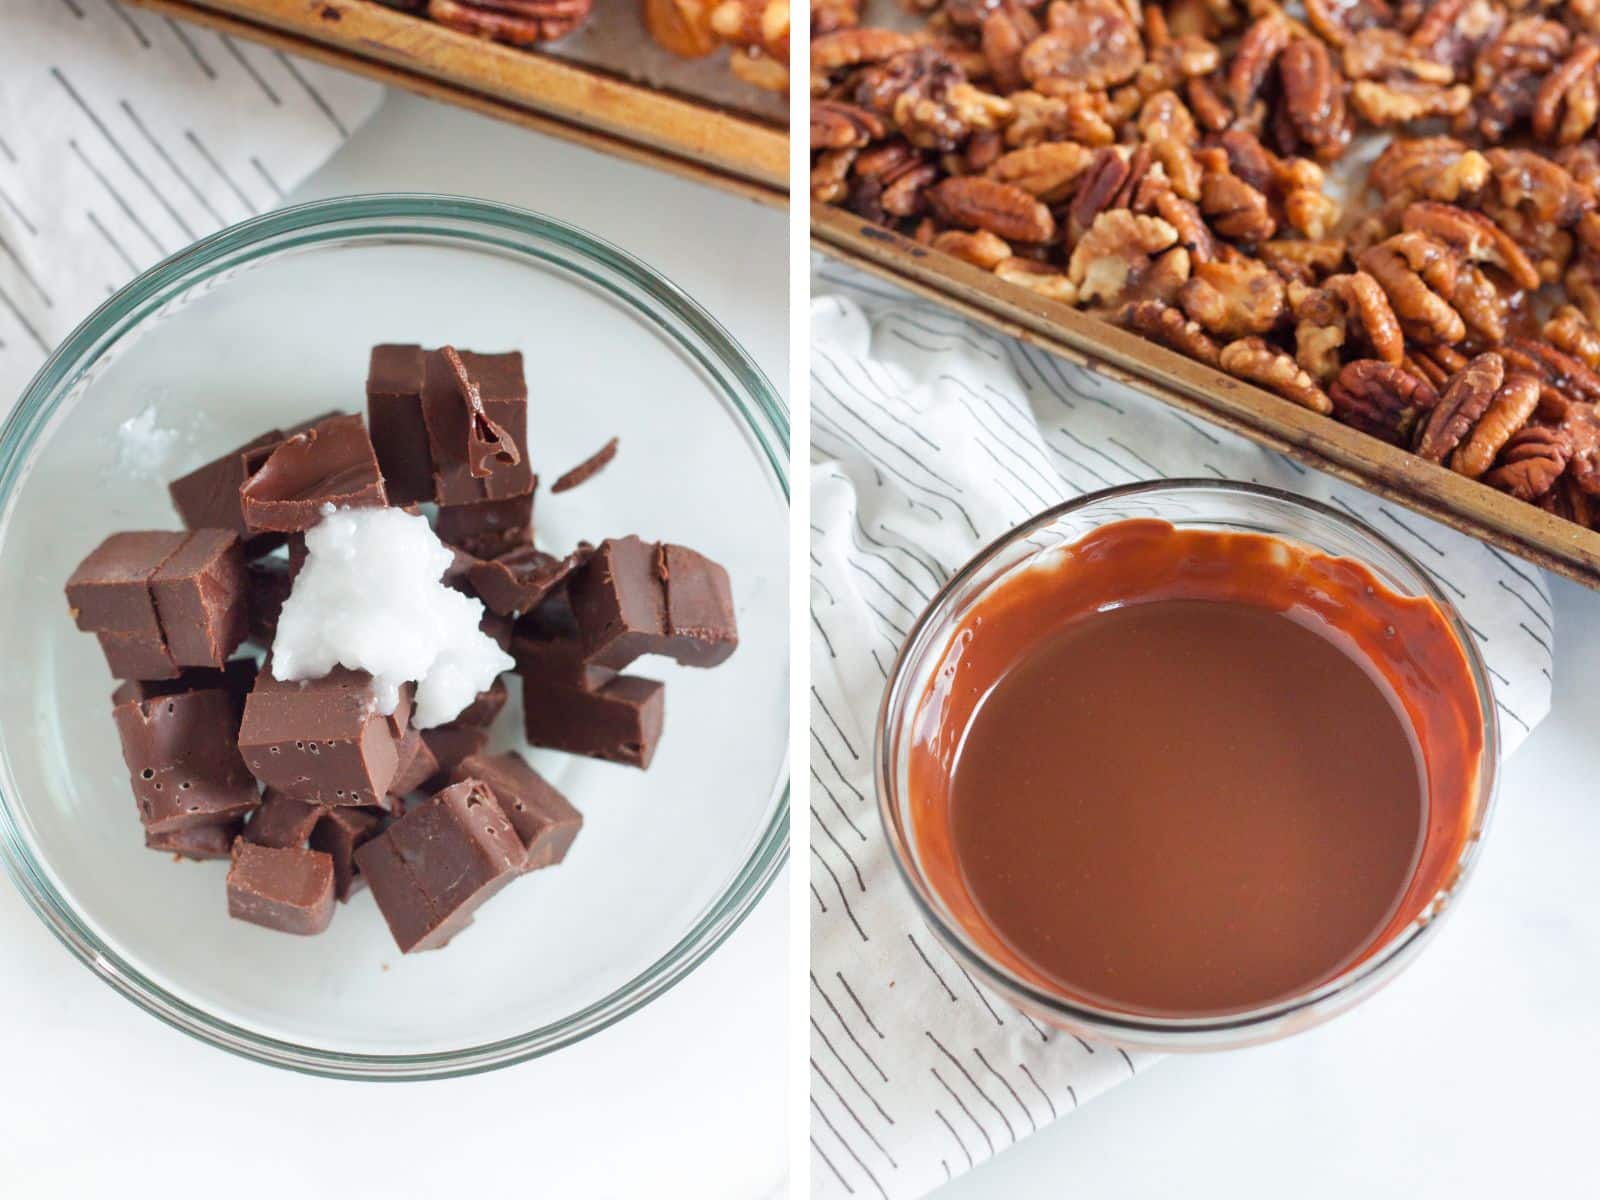 Collage image of coconut oil and chocolate being placed in a glass bowl, second picture of melted oil and chocolate.